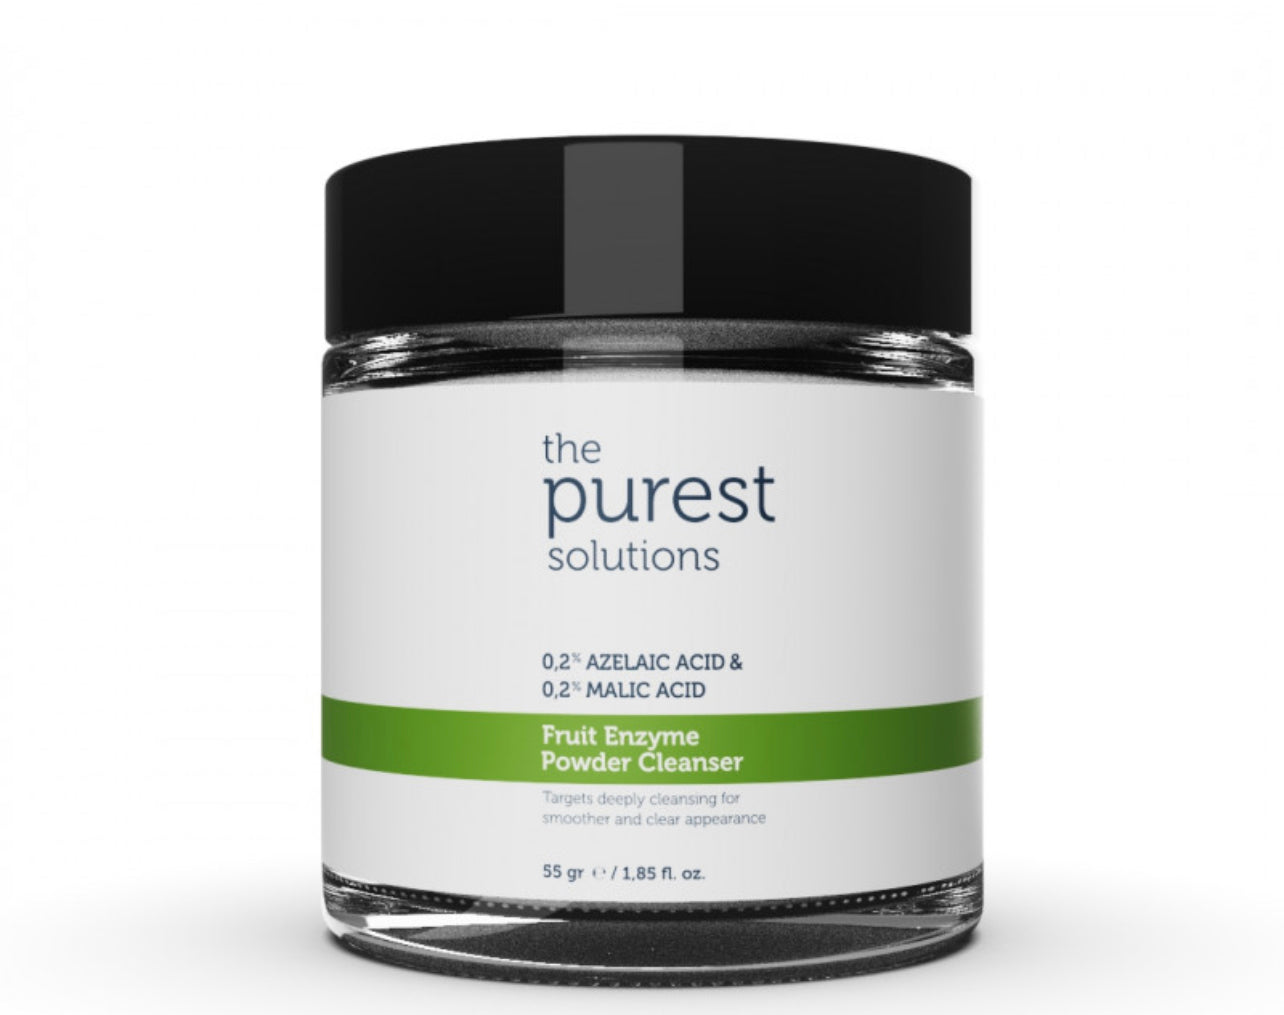 THE PUREST SOLUTIONS Fruit Enzyme Powder Cleanser 55gm